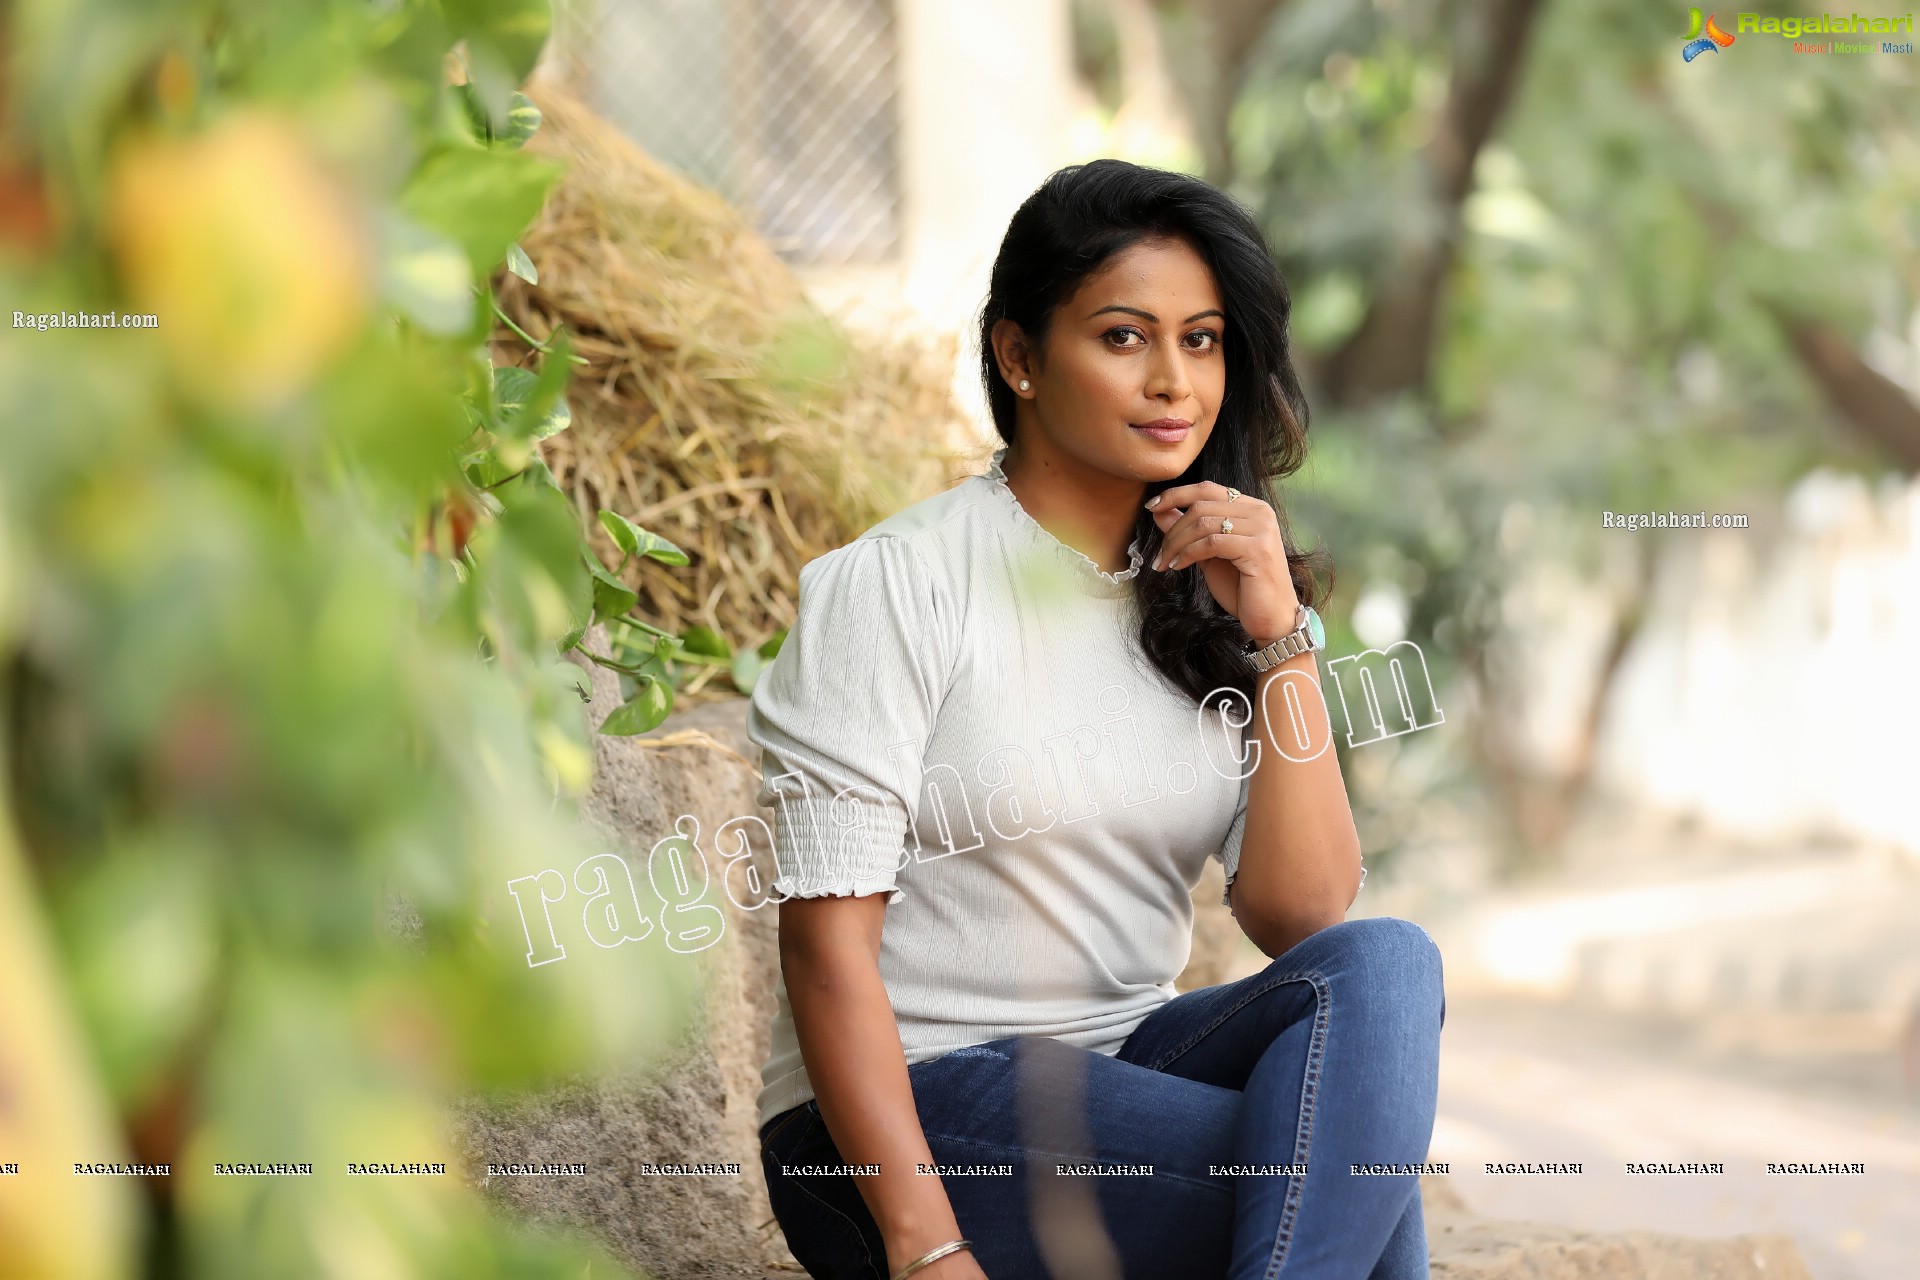 Sawali S Nandaragi in White Top and Jeans Exclusive Photo Shoot